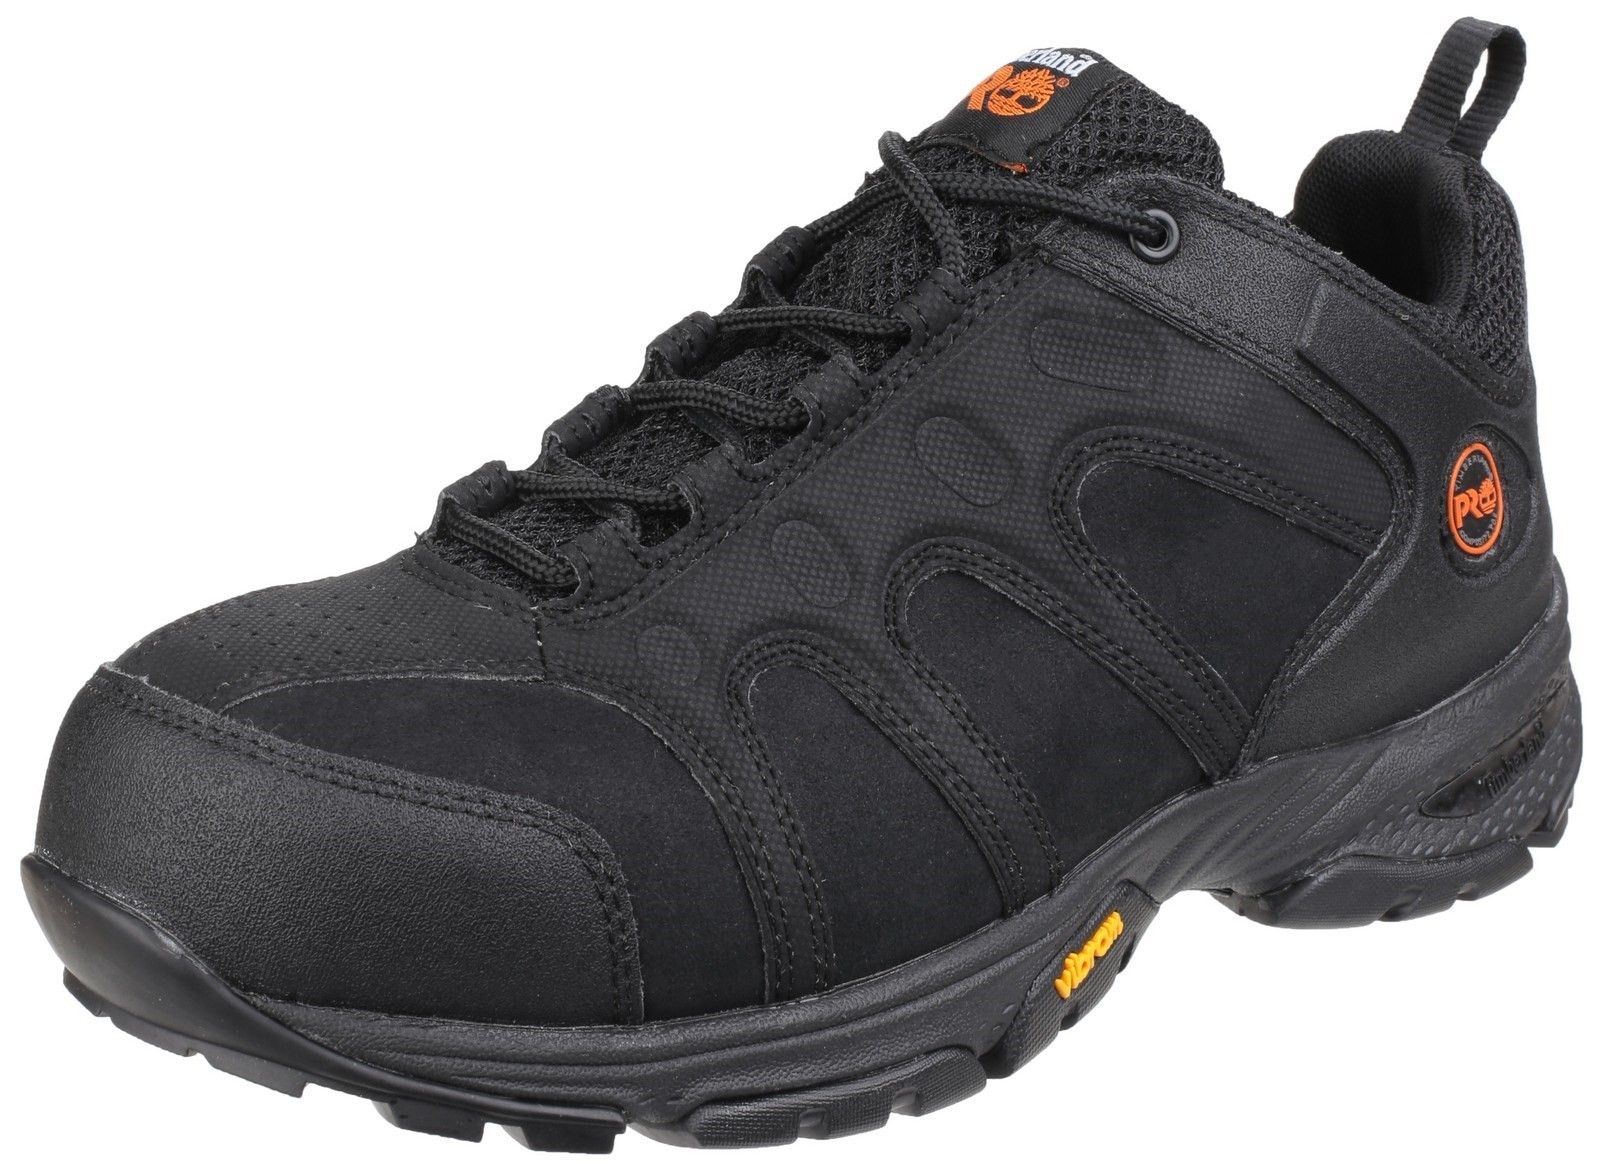 PROTECTION 24/7: The Timberland PRO Wildcard athletic work shoe features a composite safety toe, padded top collar, puncture-resistant plate, and a slip and oil-resistant Vibram rubber outsole, allowing for casual style and uncompromised protection.Timberland PRO Wildcard rugged low hiker with impact and compression resistant toe cap. 
Anti-static with an energy absorbing heel. 
Penetration resistance 1100 Newtons. 
300 degrees high heat resistance. 
Slip resistance SRA - Resistance against slipping on ceramic surfaces covered with water and cleaning products.